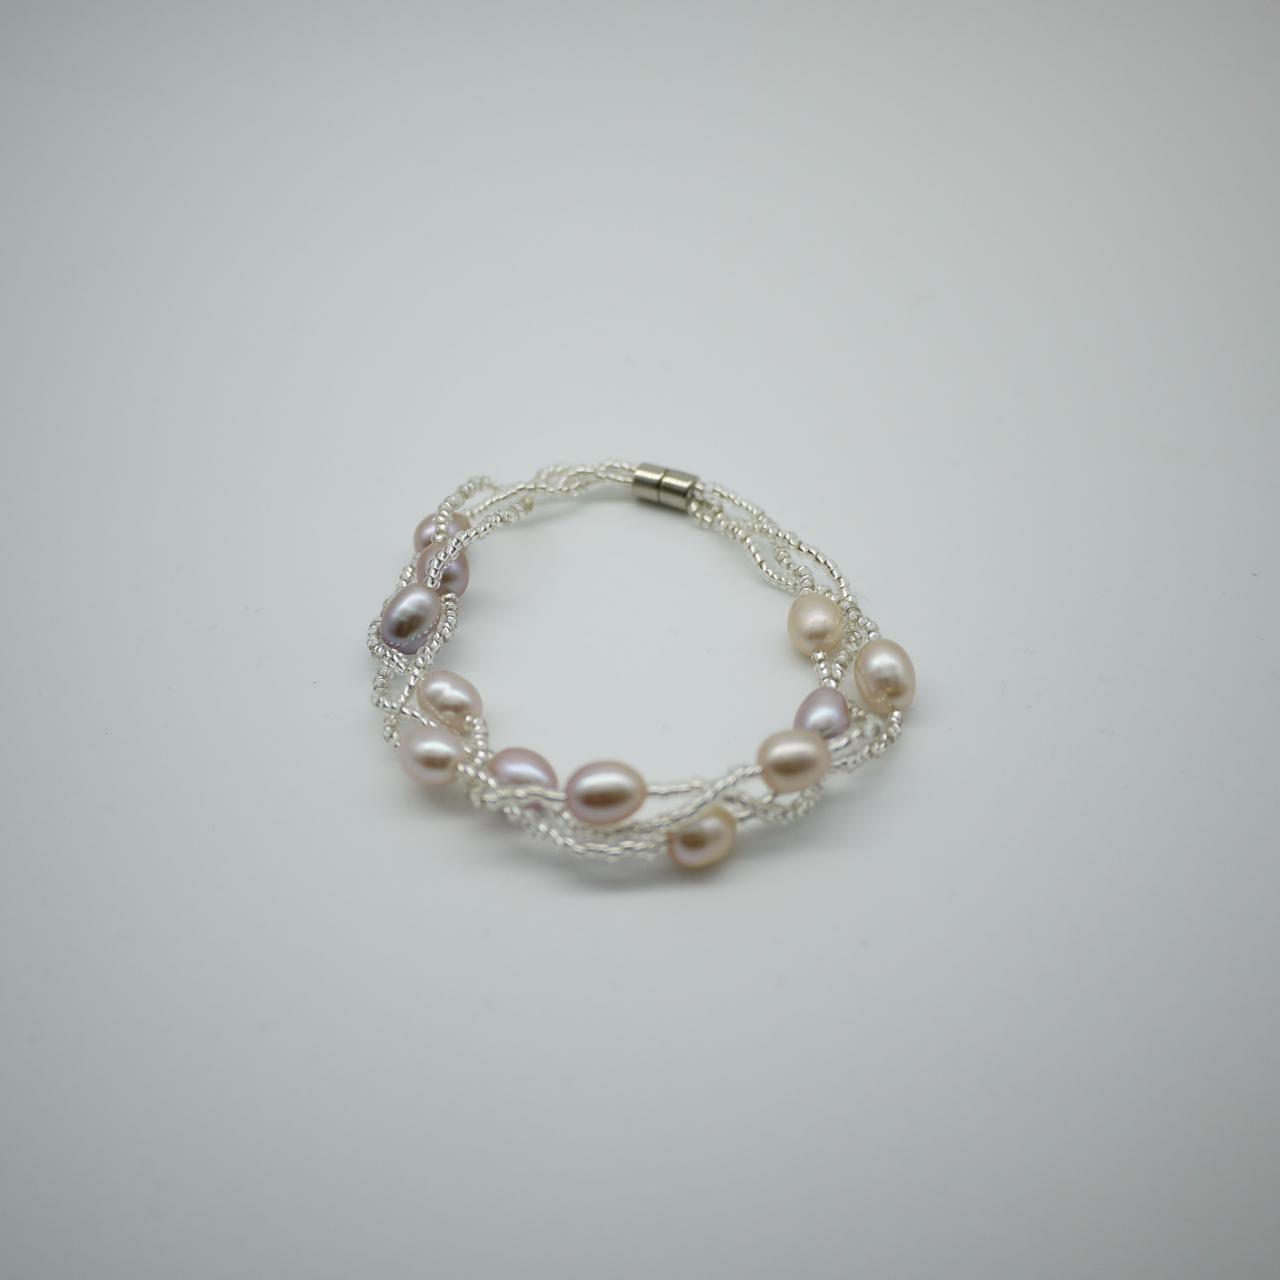 Simply Bracelet - Freshwater Pearl Bracelet - Purple, Pink And White Pearl